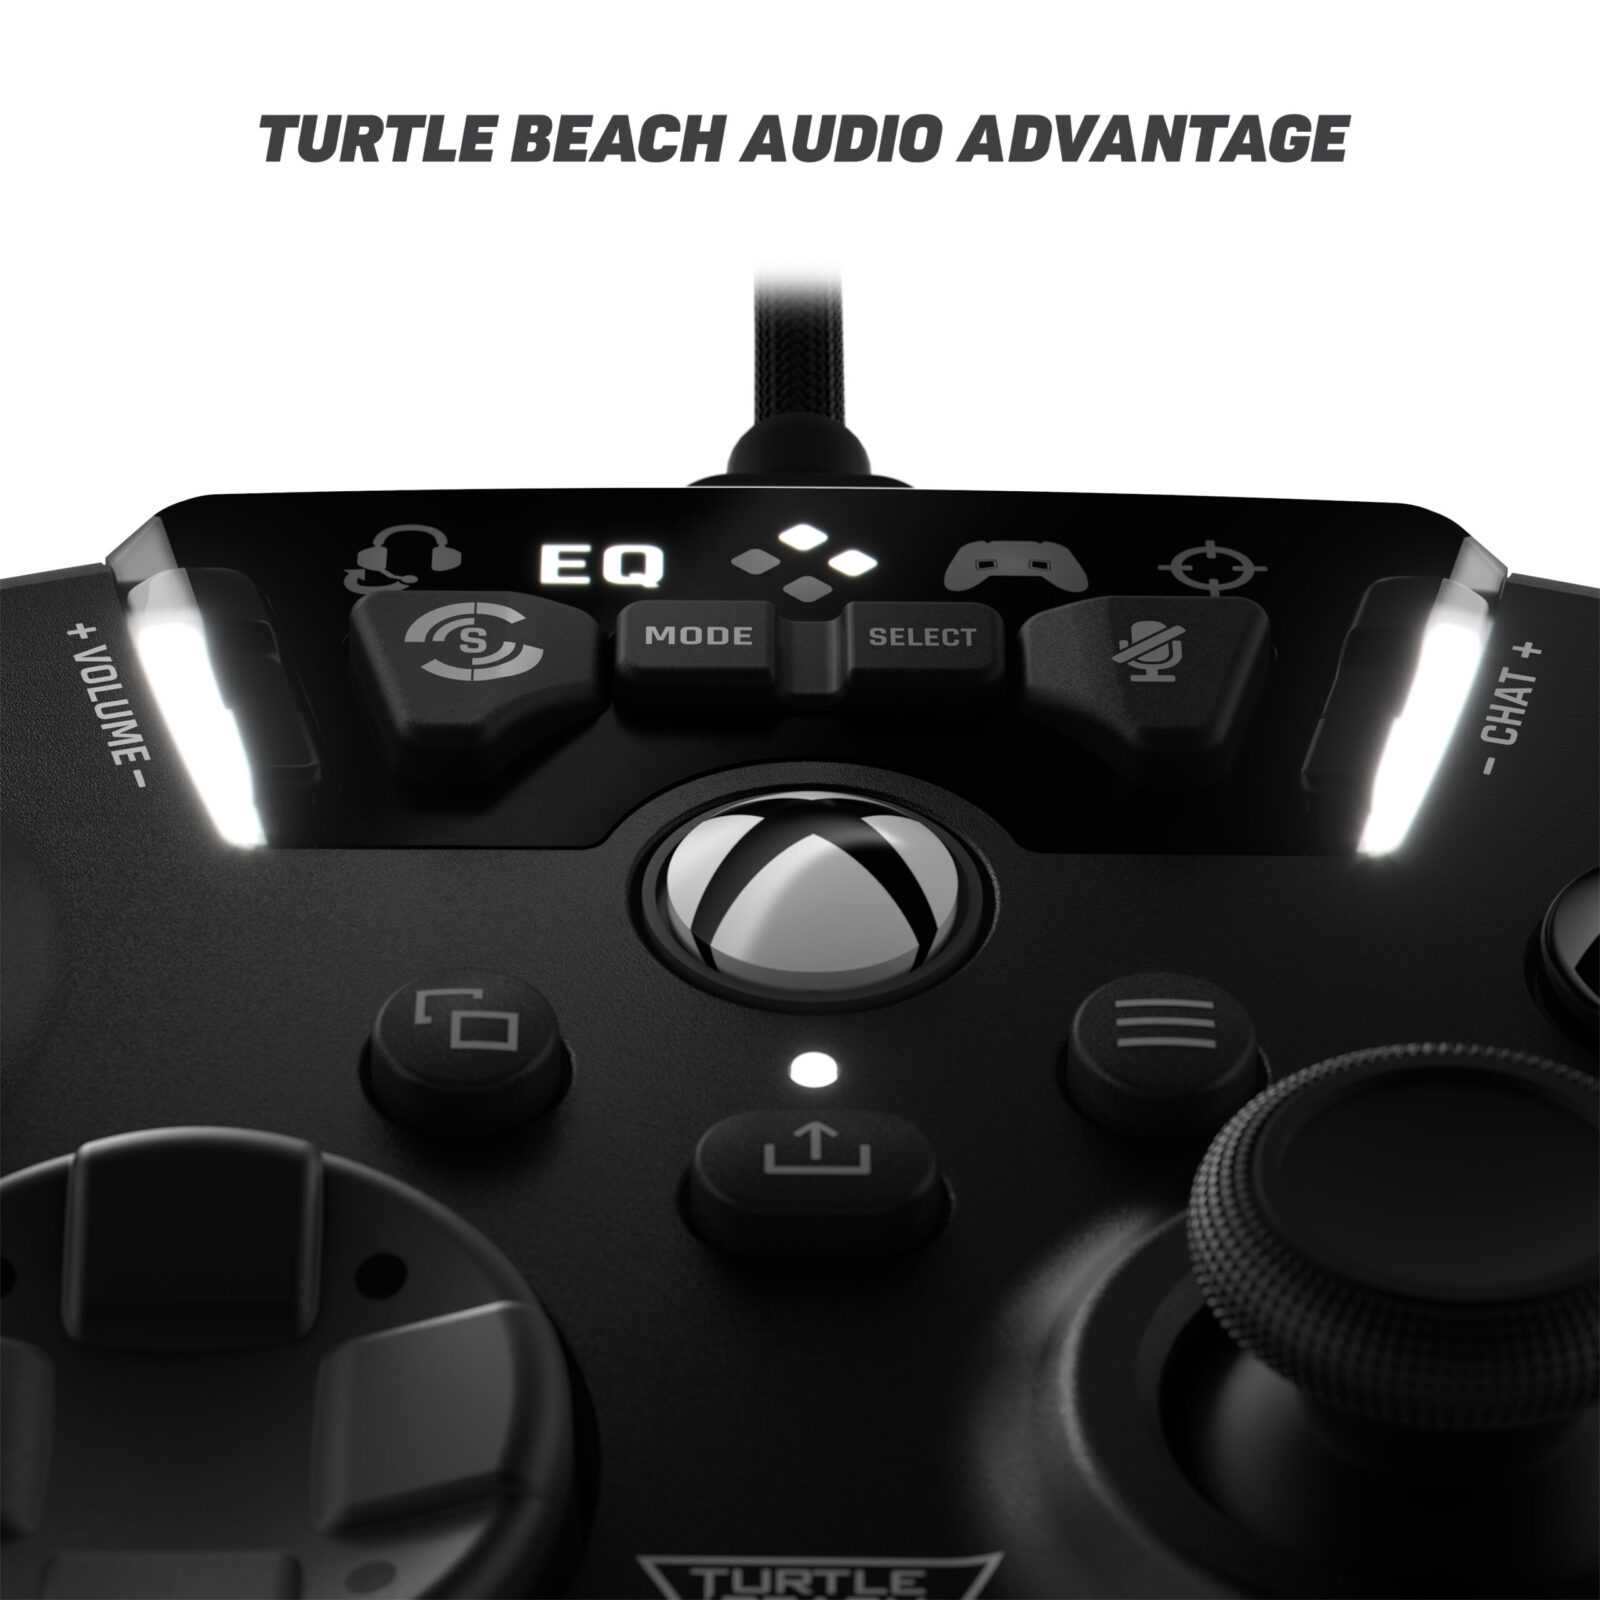 Turtle Beach® Recon™ Controller Wired Game Controller for Xbox